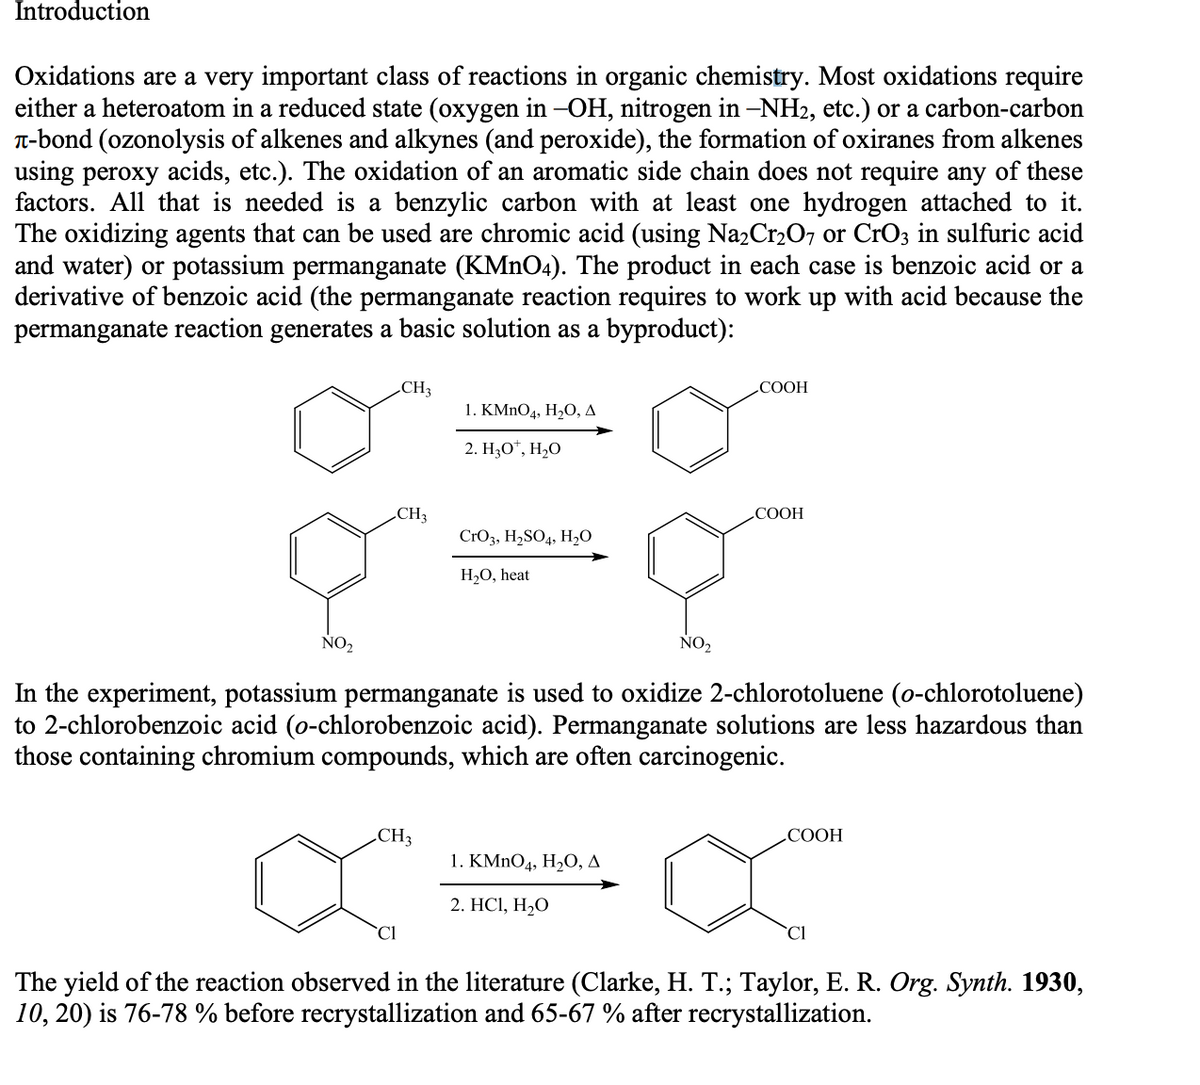 Introduction
Oxidations are a very important class of reactions in organic chemistry. Most oxidations require
either a heteroatom in a reduced state (oxygen in -OH, nitrogen in –NH2, etc.) or a carbon-carbon
T-bond (ozonolysis of alkenes and alkynes (and peroxide), the formation of oxiranes from alkenes
using peroxy acids, etc.). The oxidation of an aromatic side chain does not require any of these
factors. All that is needed is a benzylic carbon with at least one hydrogen attached to it.
The oxidizing agents that can be used are chromic acid (using Na2Cr2O7 or CrO3 in sulfuric acid
and water) or potassium permanganate (KMNO4). The product in each case is benzoic acid or a
derivative of benzoic acid (the permanganate reaction requires to work up with acid because the
permanganate reaction generates a basic solution as a byproduct):
CH3
СООН
1. КMnOд, Н,О, д
2. Н,О", Н,О
CH3
COOH
CrO3, H,SO4, H,O
H2O, heat
NO2
NO2
In the experiment, potassium permanganate is used to oxidize 2-chlorotoluene (o-chlorotoluene)
to 2-chlorobenzoic acid (o-chlorobenzoic acid). Permanganate solutions are less hazardous than
those containing chromium compounds, which are often carcinogenic.
CH3
СООН
1. KMnOд, H,О, д
2. HСІ, Н-О
`Cl
`Cl
The yield of the reaction observed in the literature (Clarke, H. T.; Taylor, E. R. Org. Synth. 1930,
10, 20) is 76-78 % before recrystallization and 65-67 % after recrystallization.
